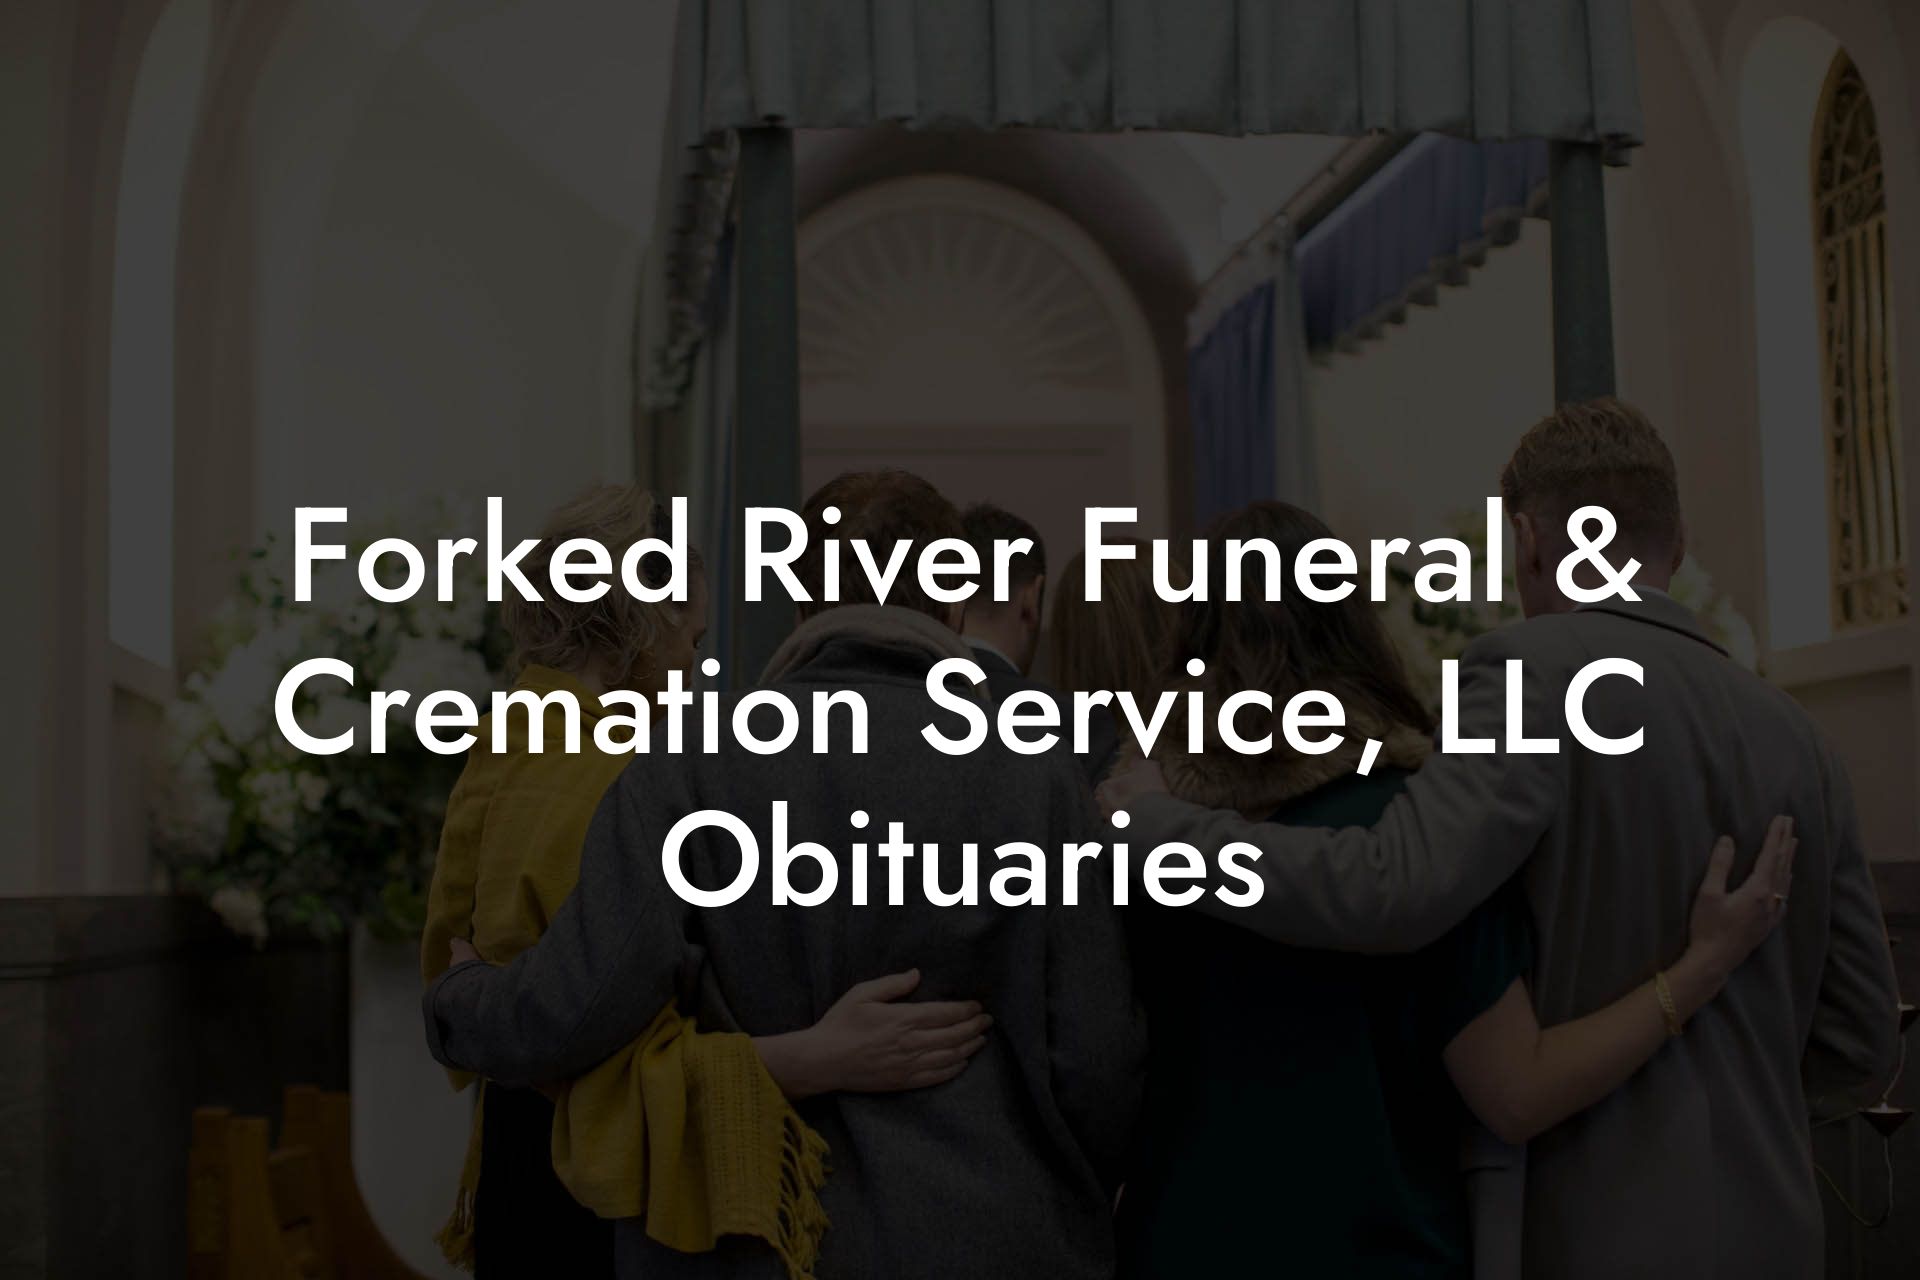 Forked River Funeral & Cremation Service, LLC Obituaries